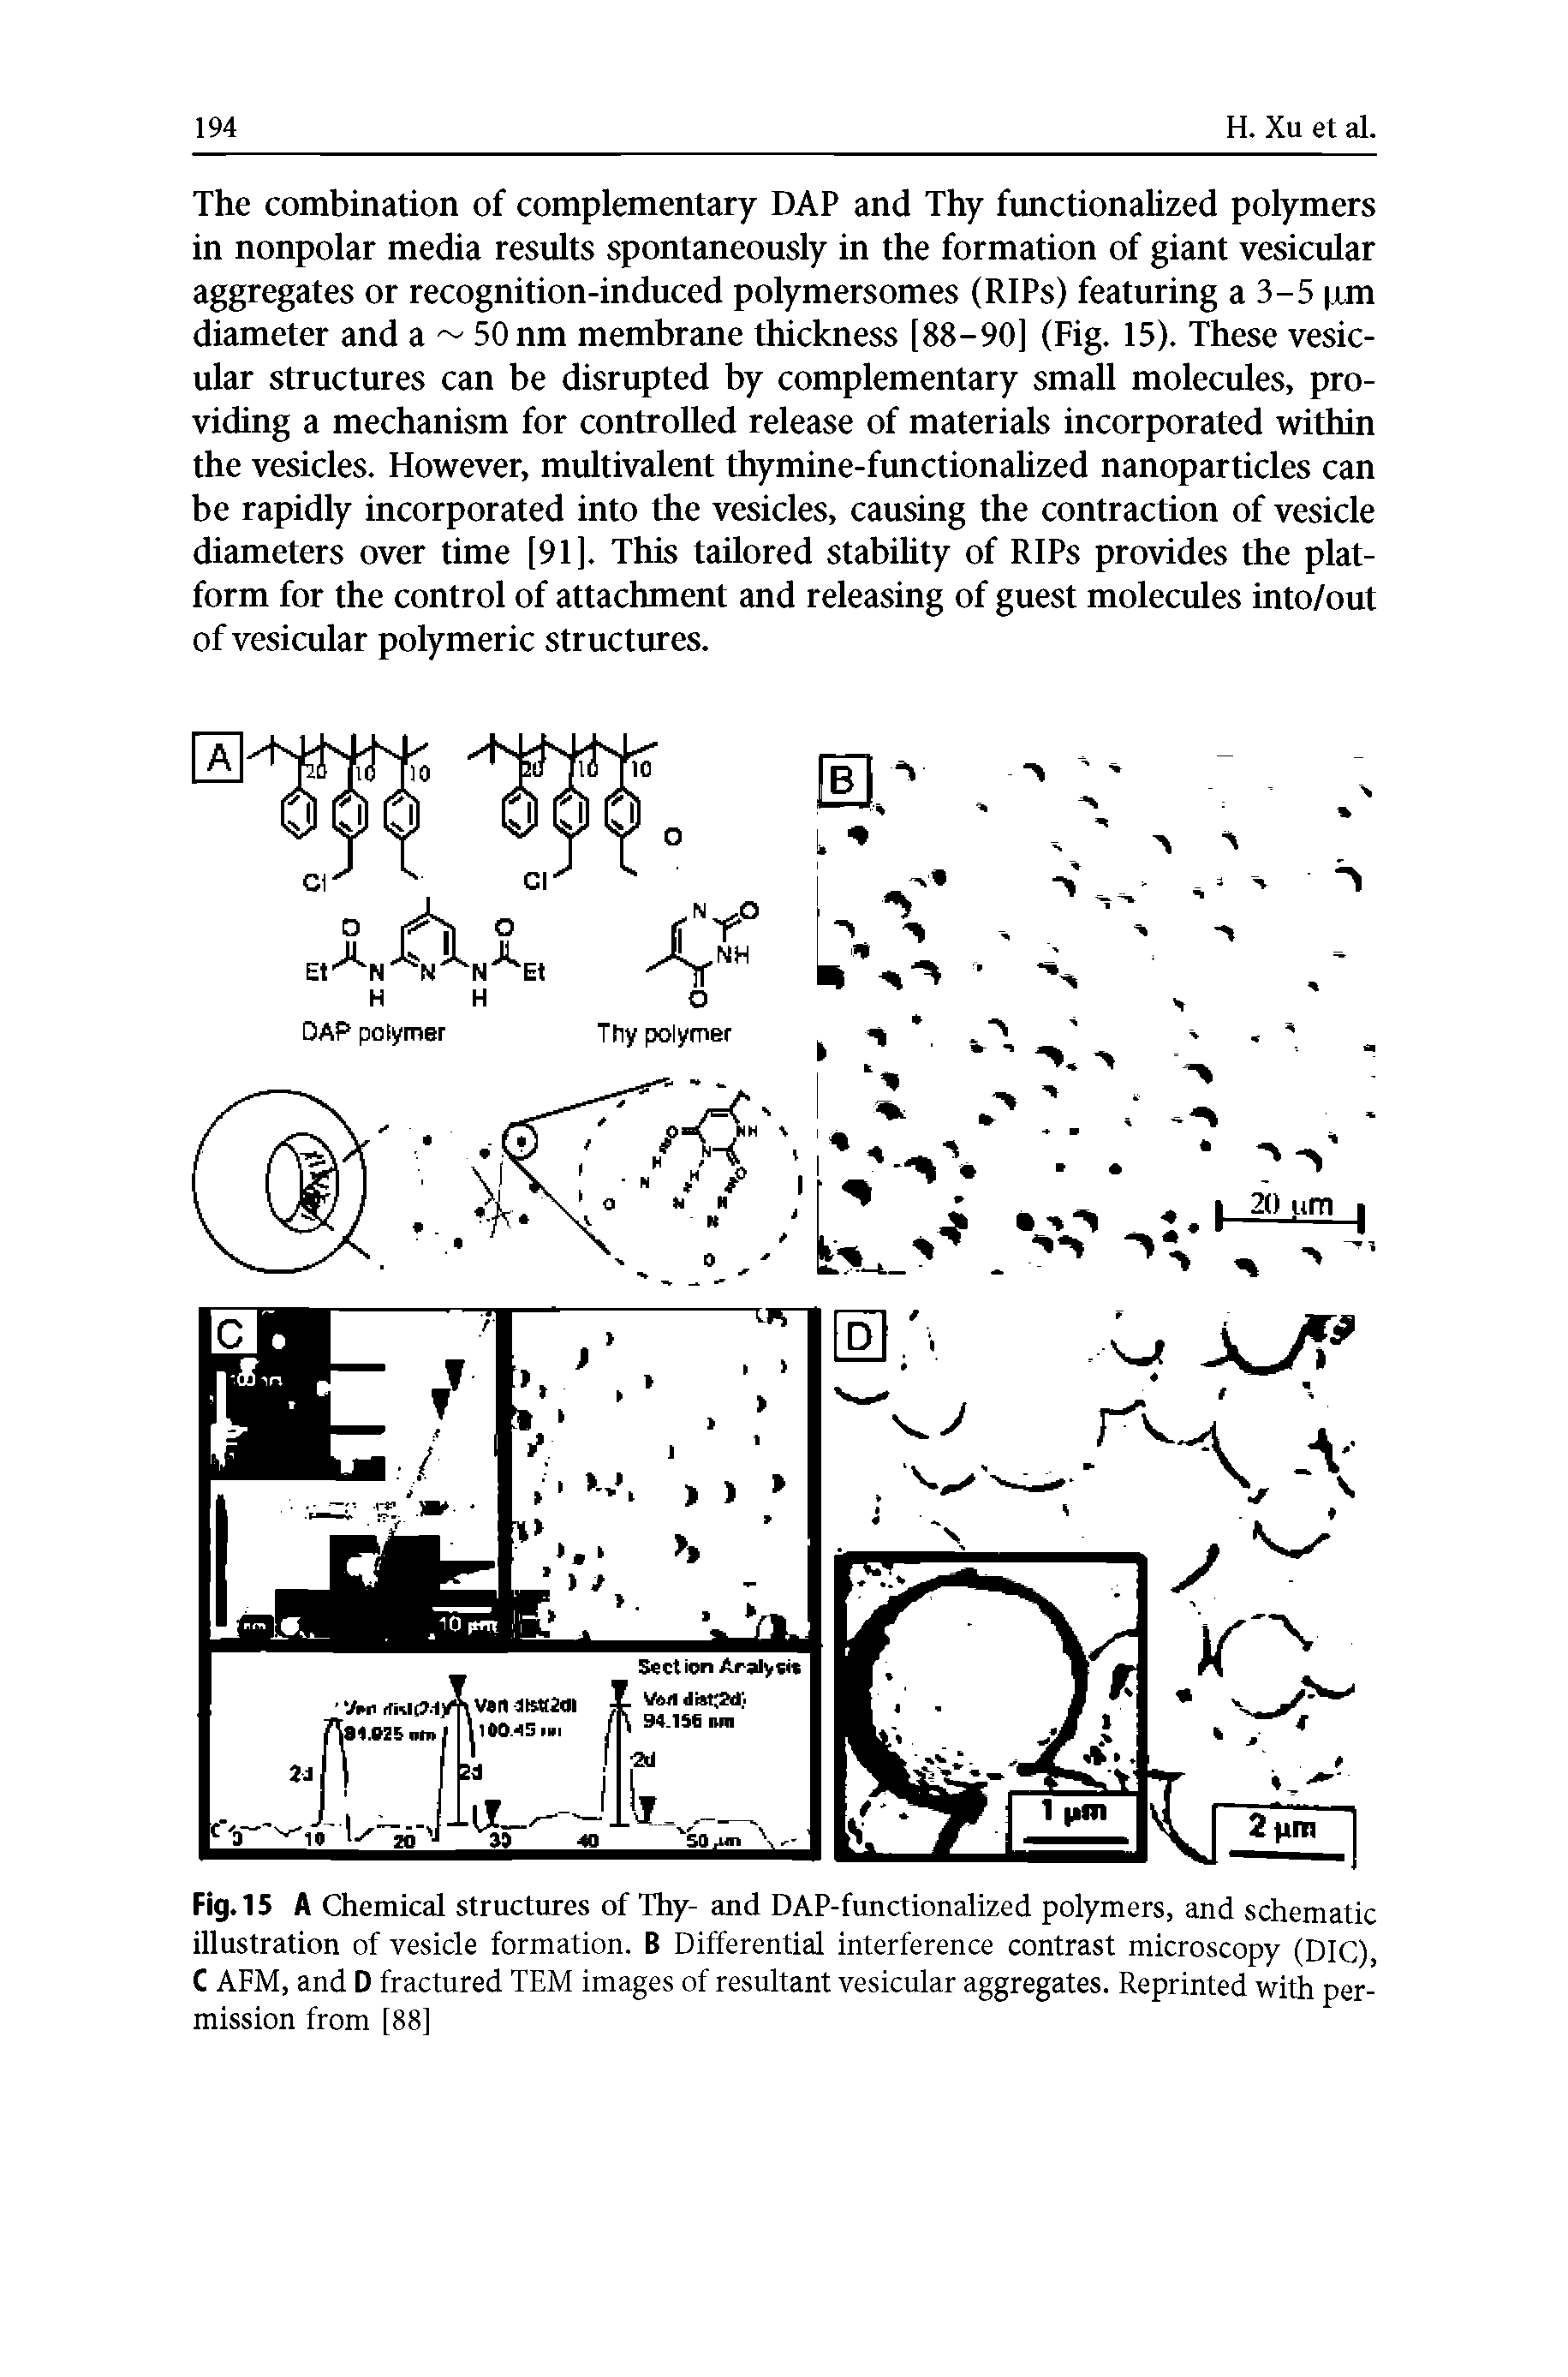 Fig. 15 A Chemical structures of Thy- and DAP-functionalized polymers, and schematic illustration of vesicle formation. B Differential interference contrast microscopy (DIG), C AFM, and D fractured TEM images of resultant vesicular aggregates. Reprinted with permission from [88]...